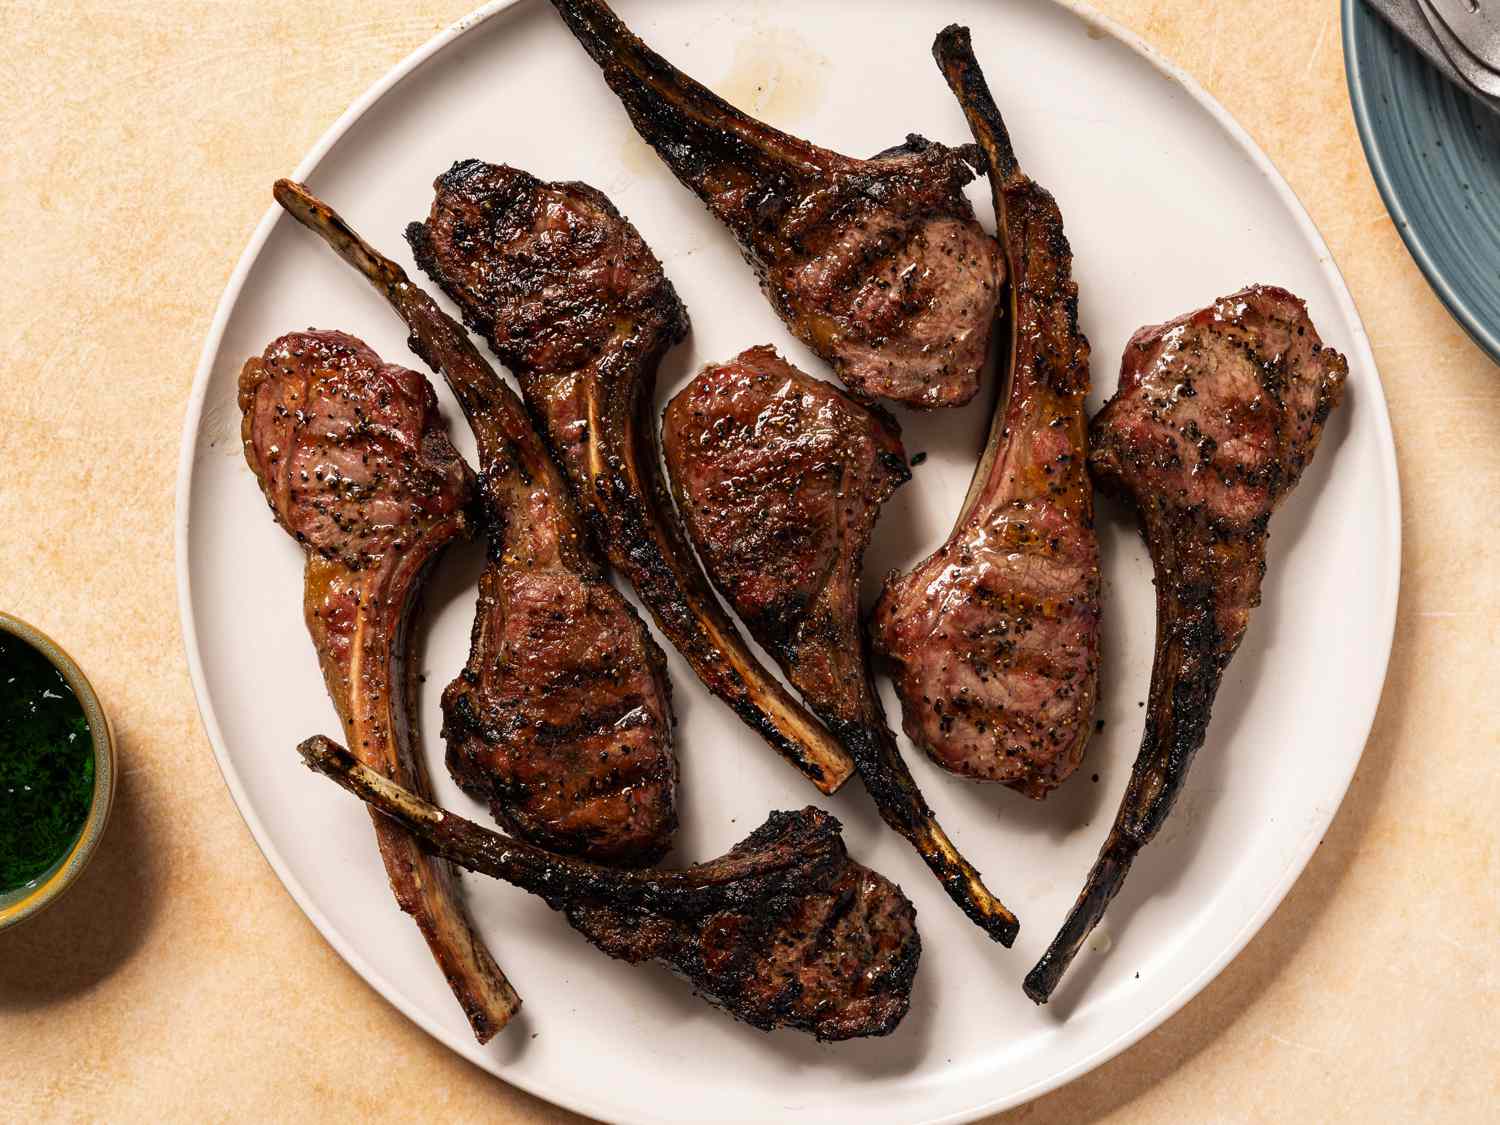 Irresistible Grilled Lamb Rib or Loin Chops Recipe is a Crowd Pleaser